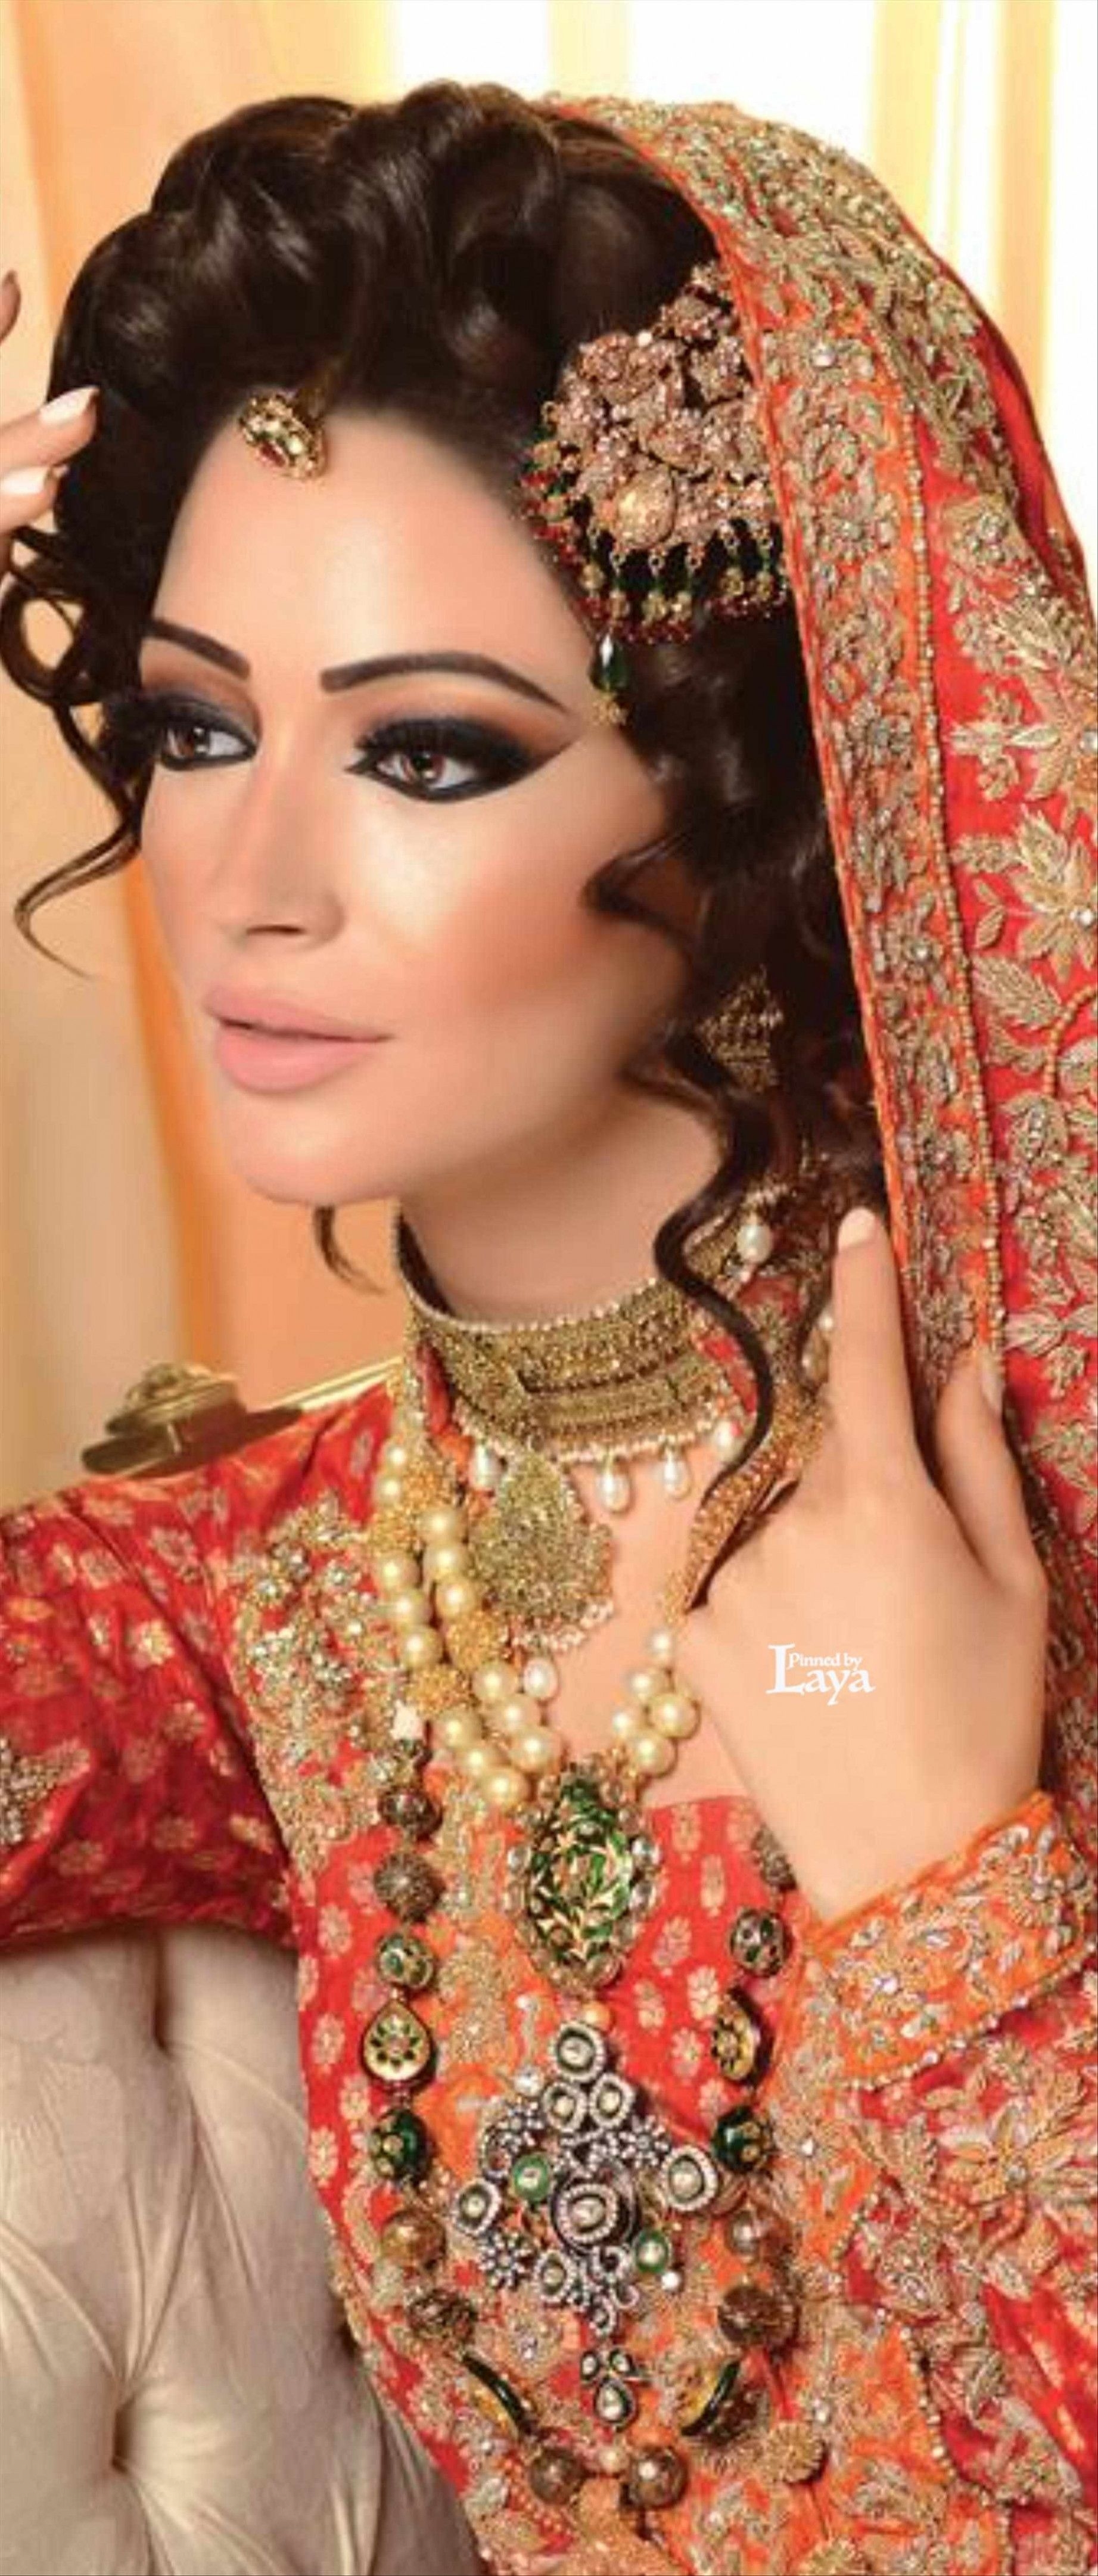 Pin On Wedding Ideas in Indian Hairstyle With Dupatta